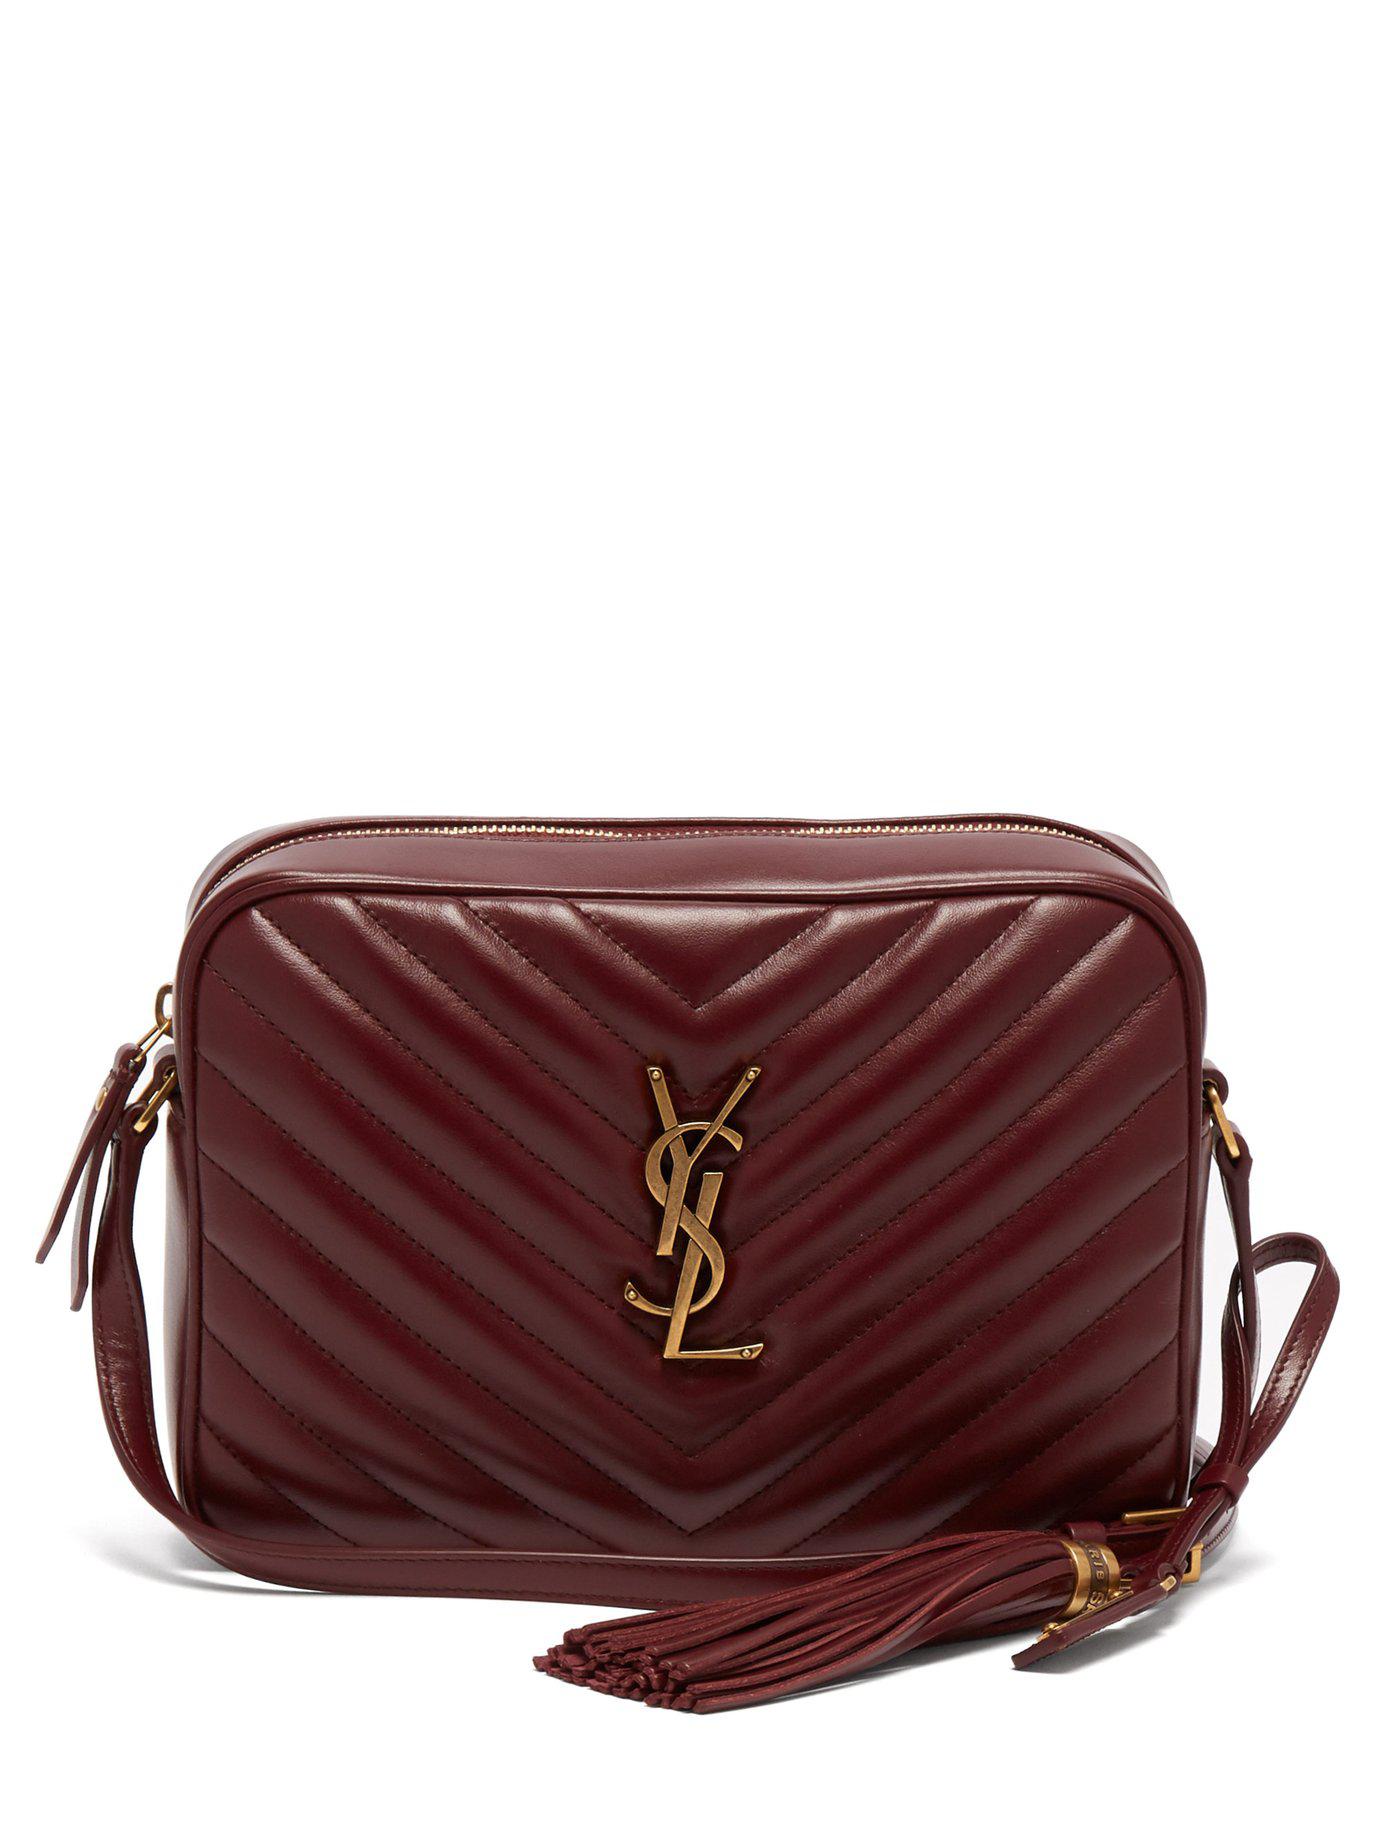 Saint Laurent Lou Quilted Leather Cross Body Bag in Burgundy (Purple) - Lyst